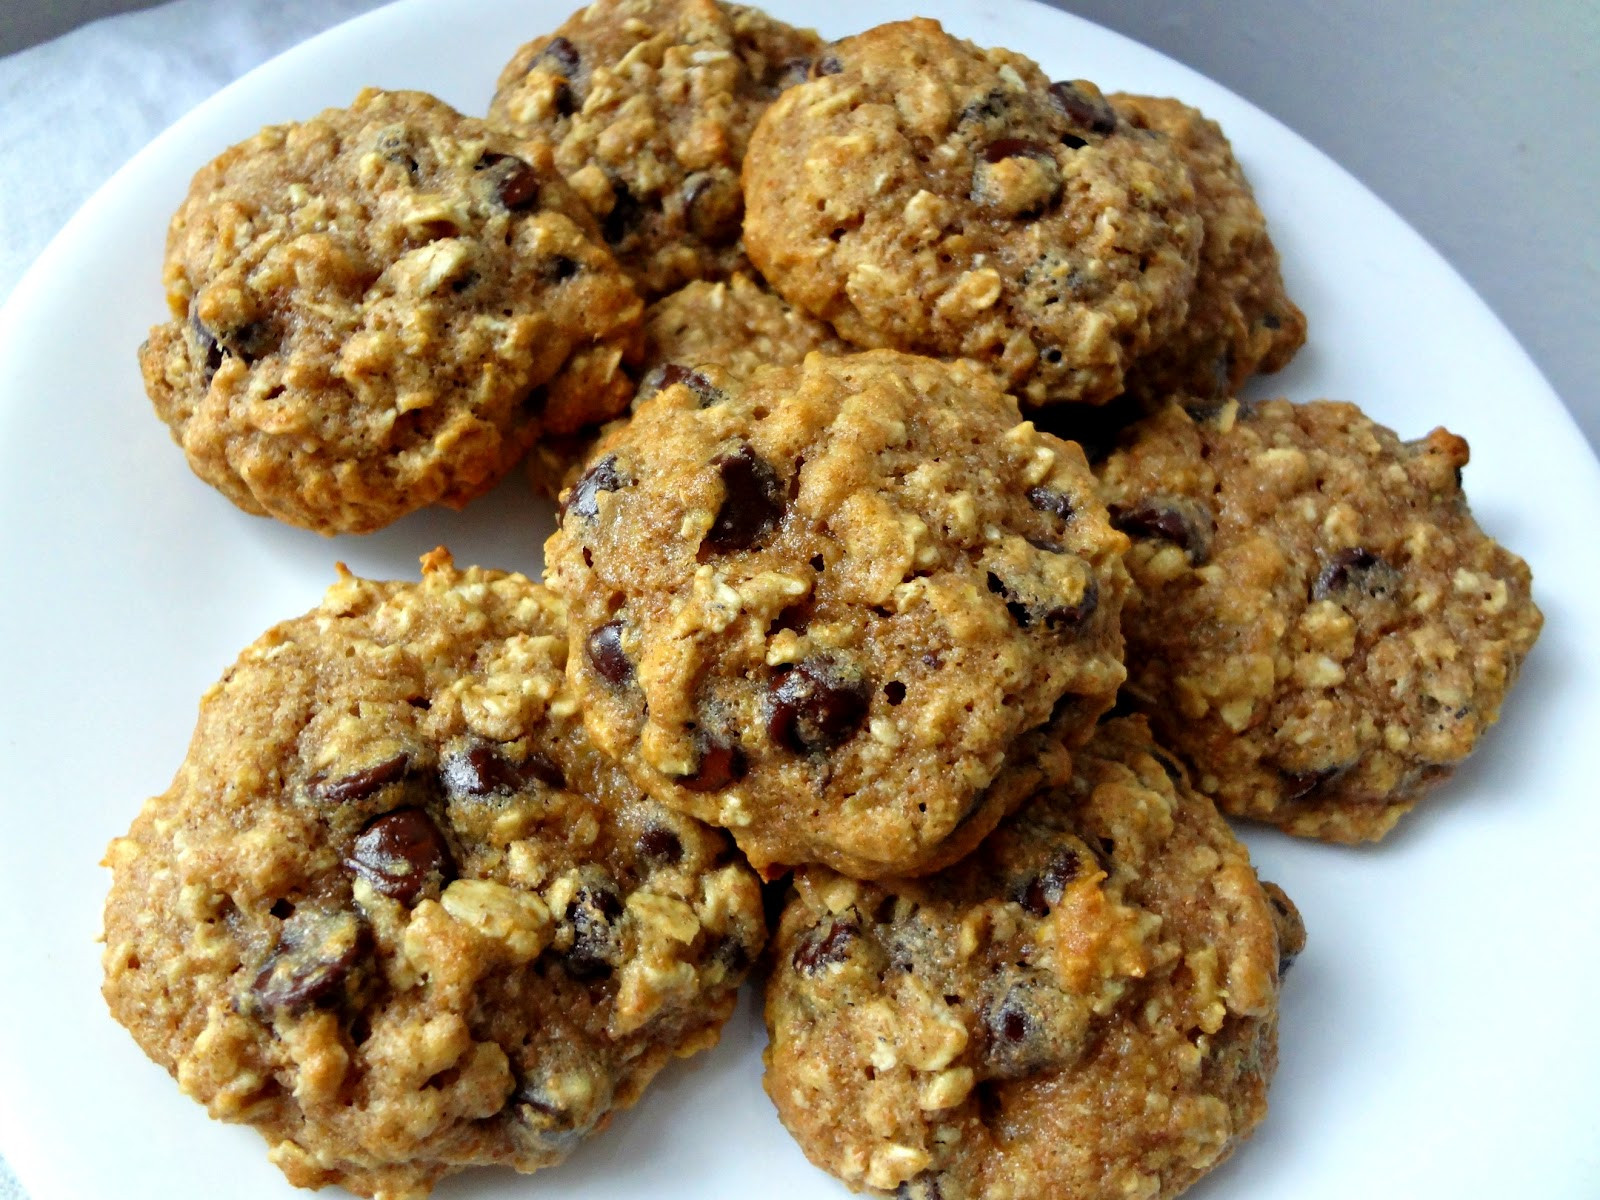 Cocoa Oatmeal Cookies Healthy
 The Cooking Actress Healthy Oatmeal Chocolate Chip Cookies